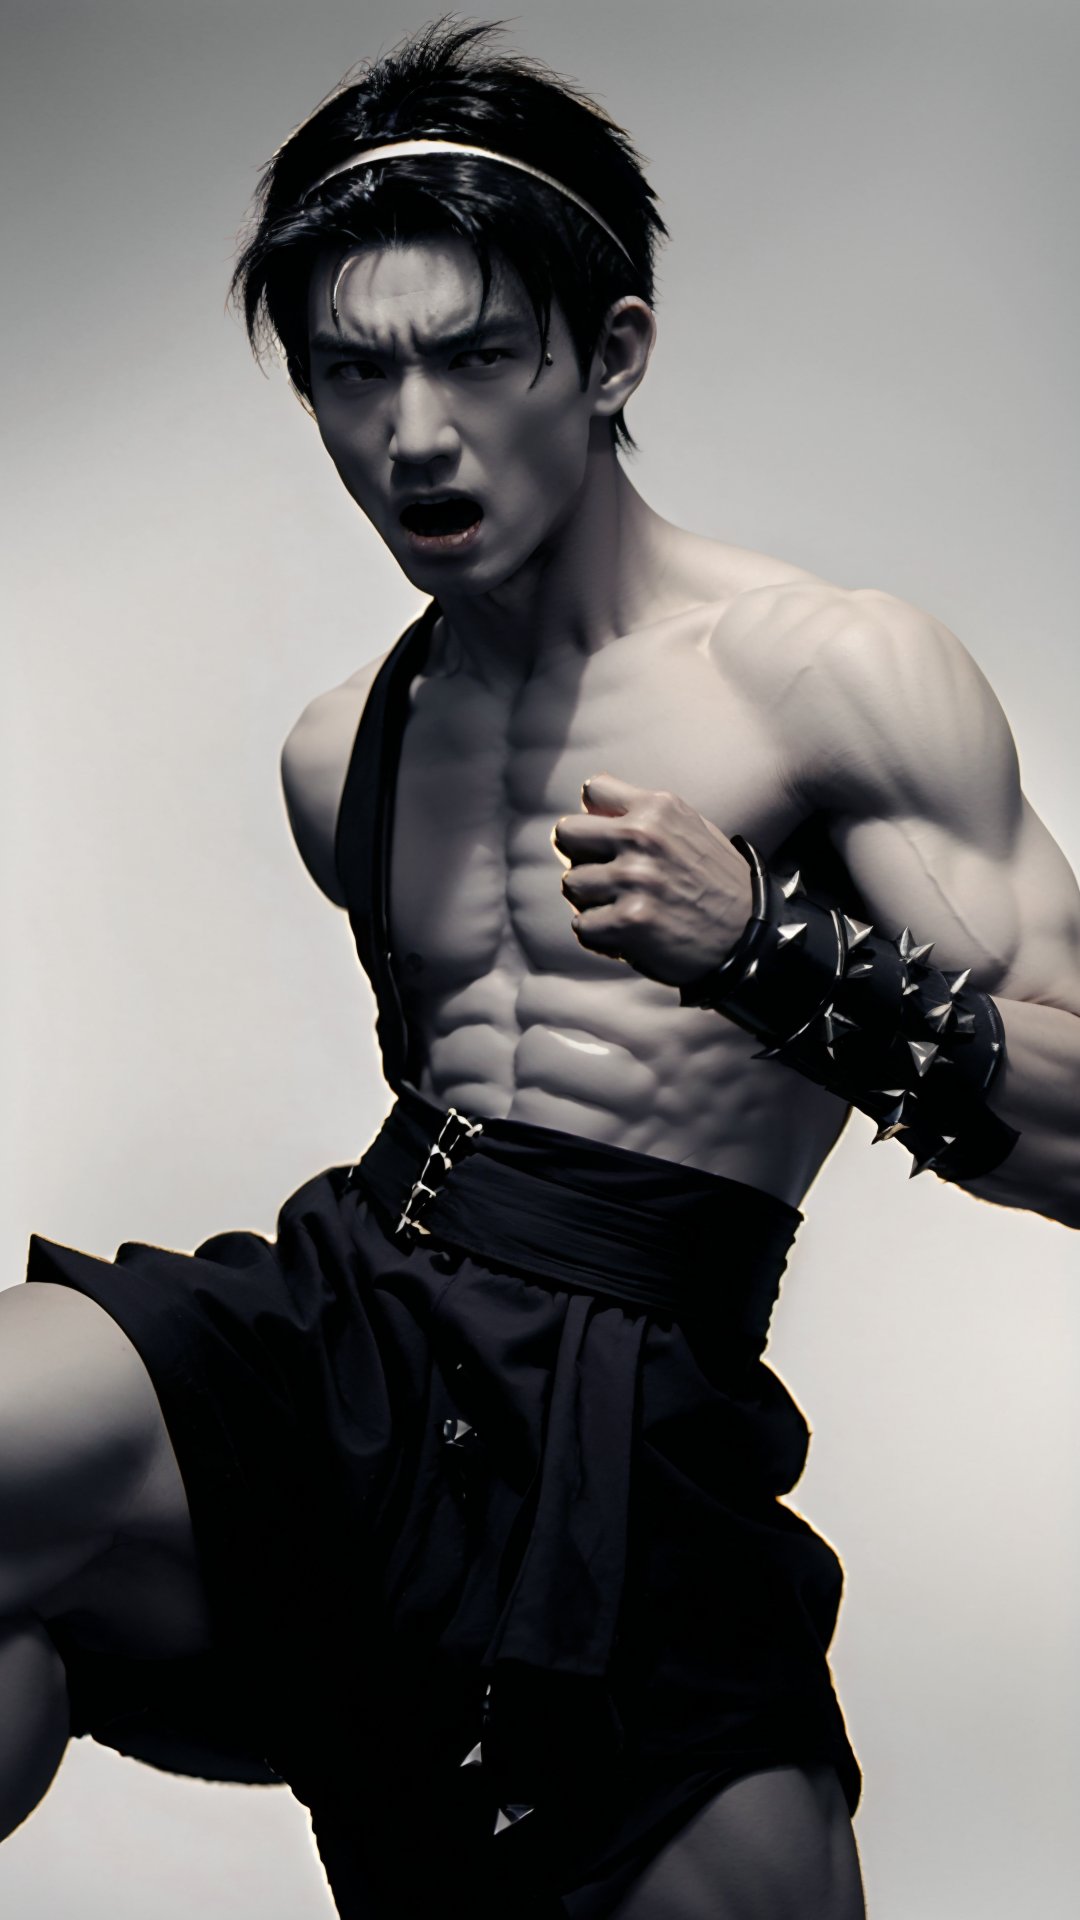 unique style, handsome martial artist male, short spiky hair, very tall, martial arts headband, dnd monk, angry face yelling, wearing open shirt. fit body six pack, wearing iron gauntlets, monochrome, white background, monochrome, white background,nestskyo